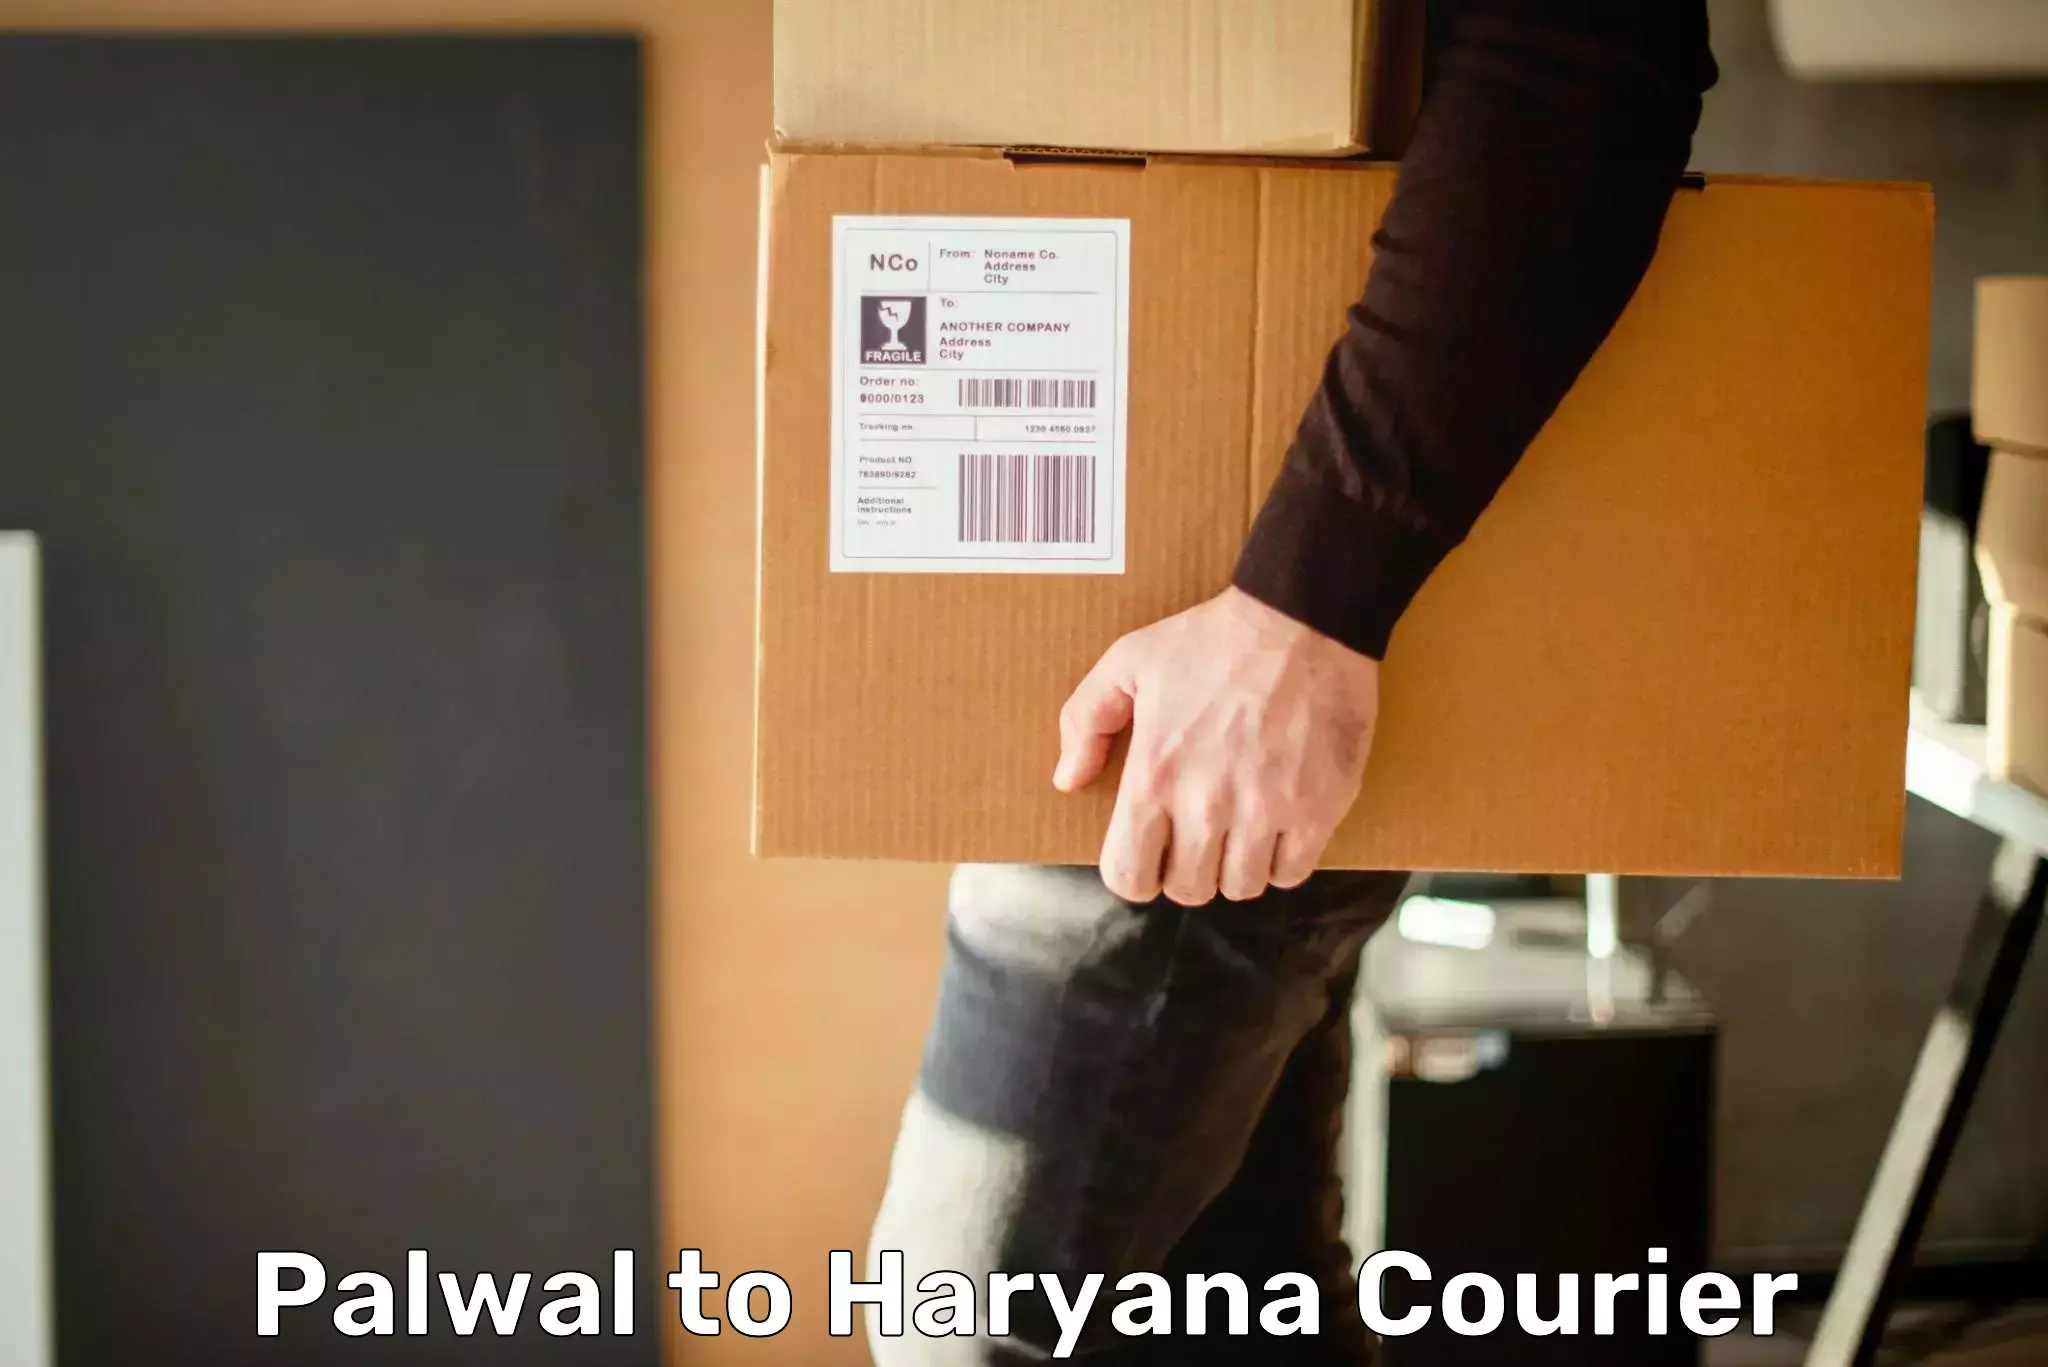 State-of-the-art courier technology Palwal to Haryana